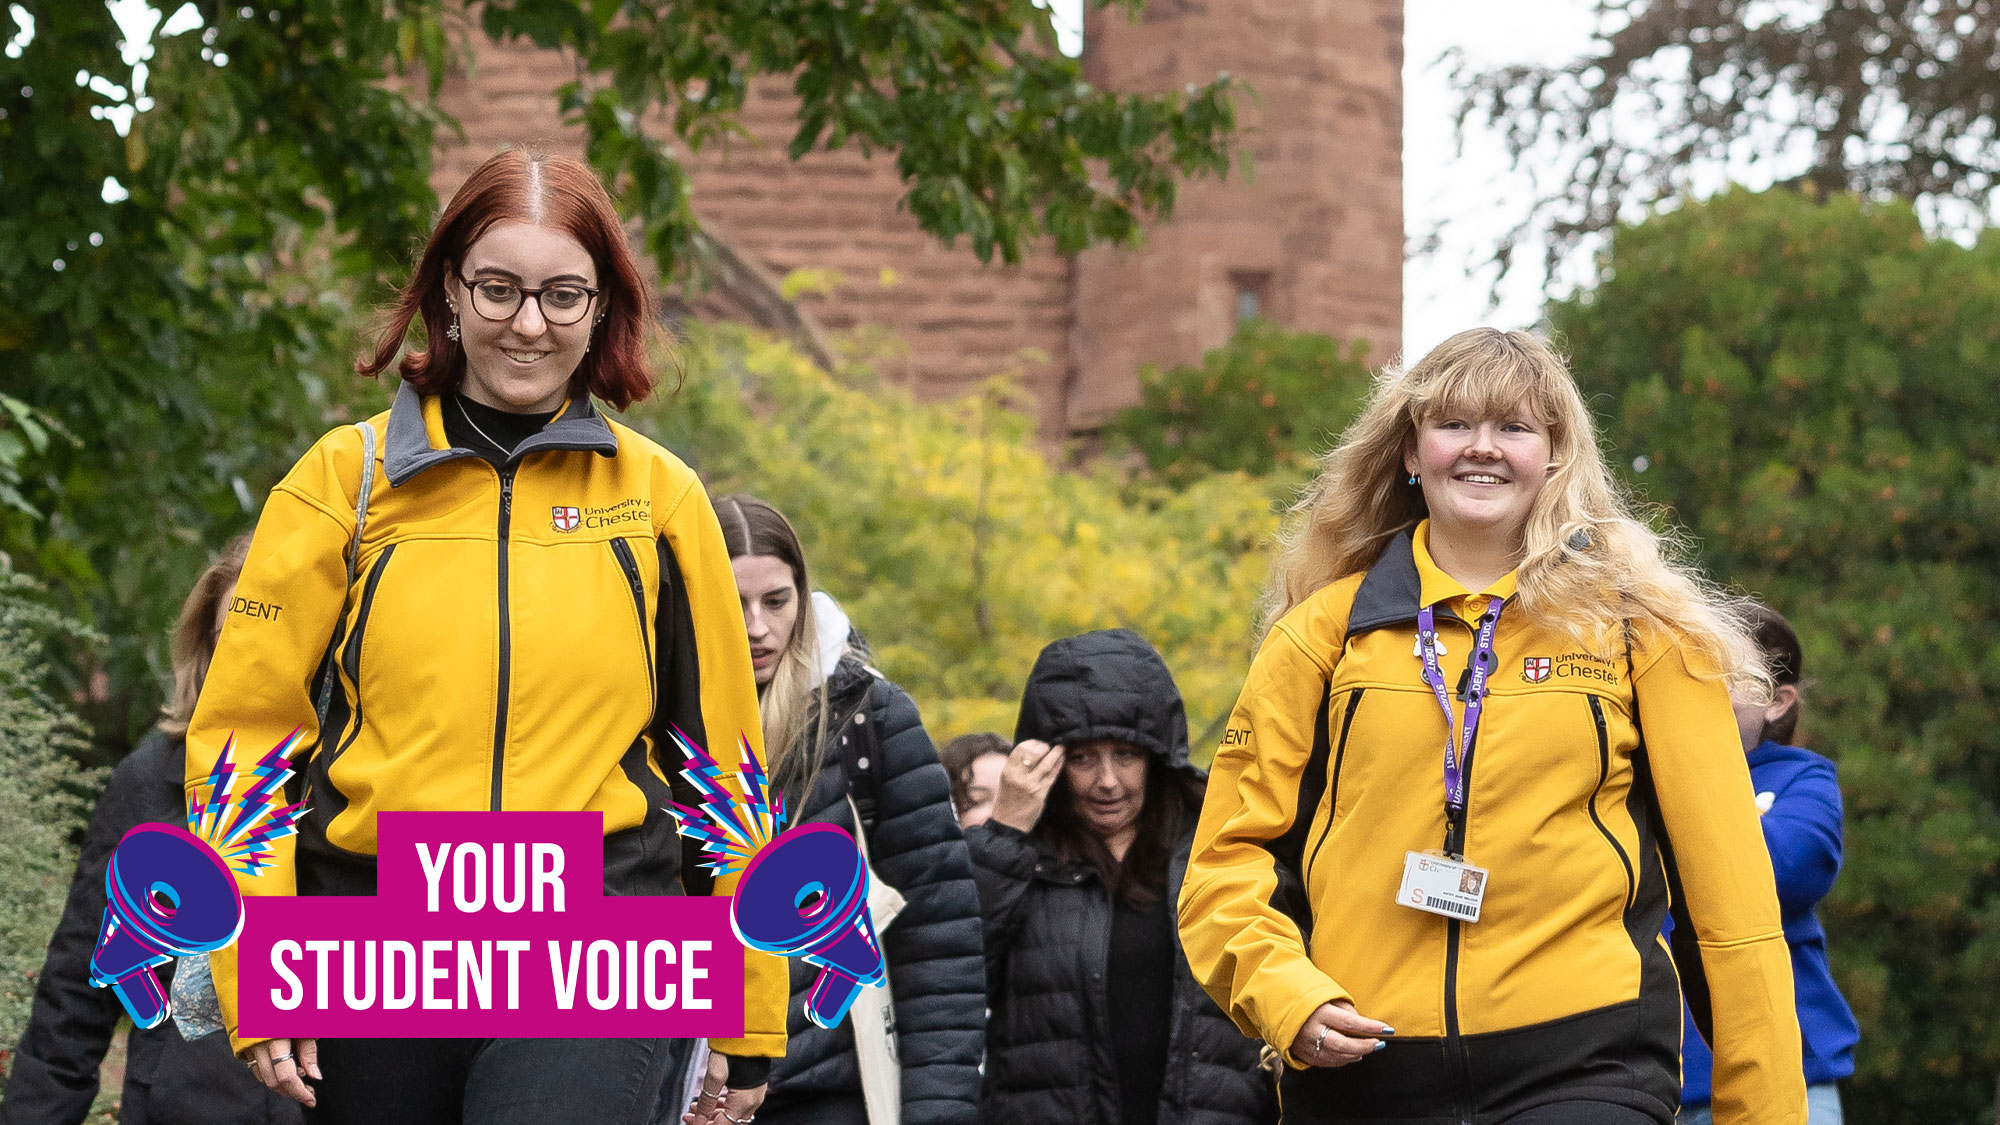 Your Student Voice: Timetabling